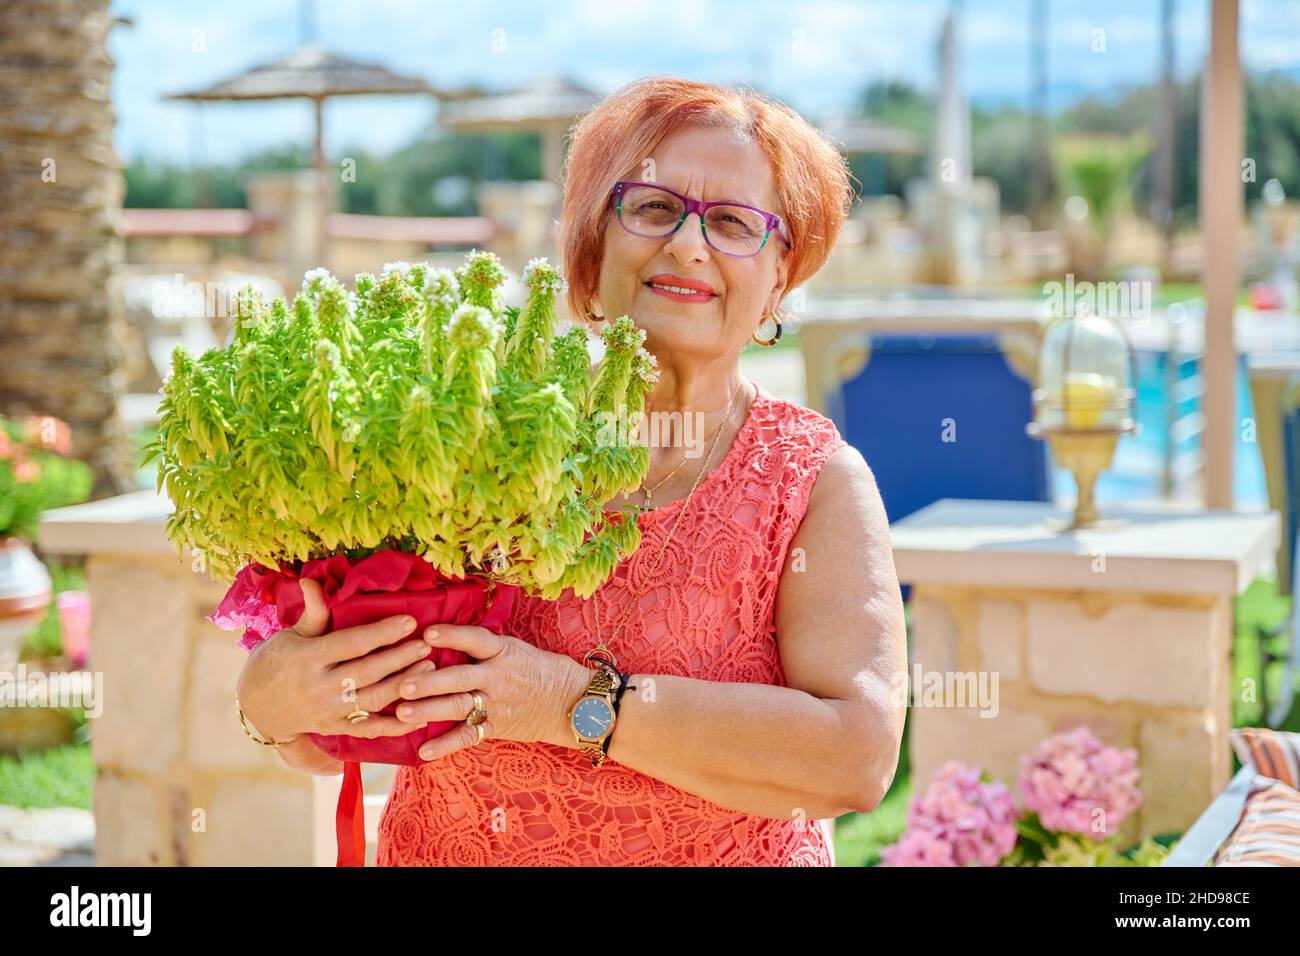 Outdoor portrait of an elderly beautiful 70s woman with basil plant in pot Stock Photo